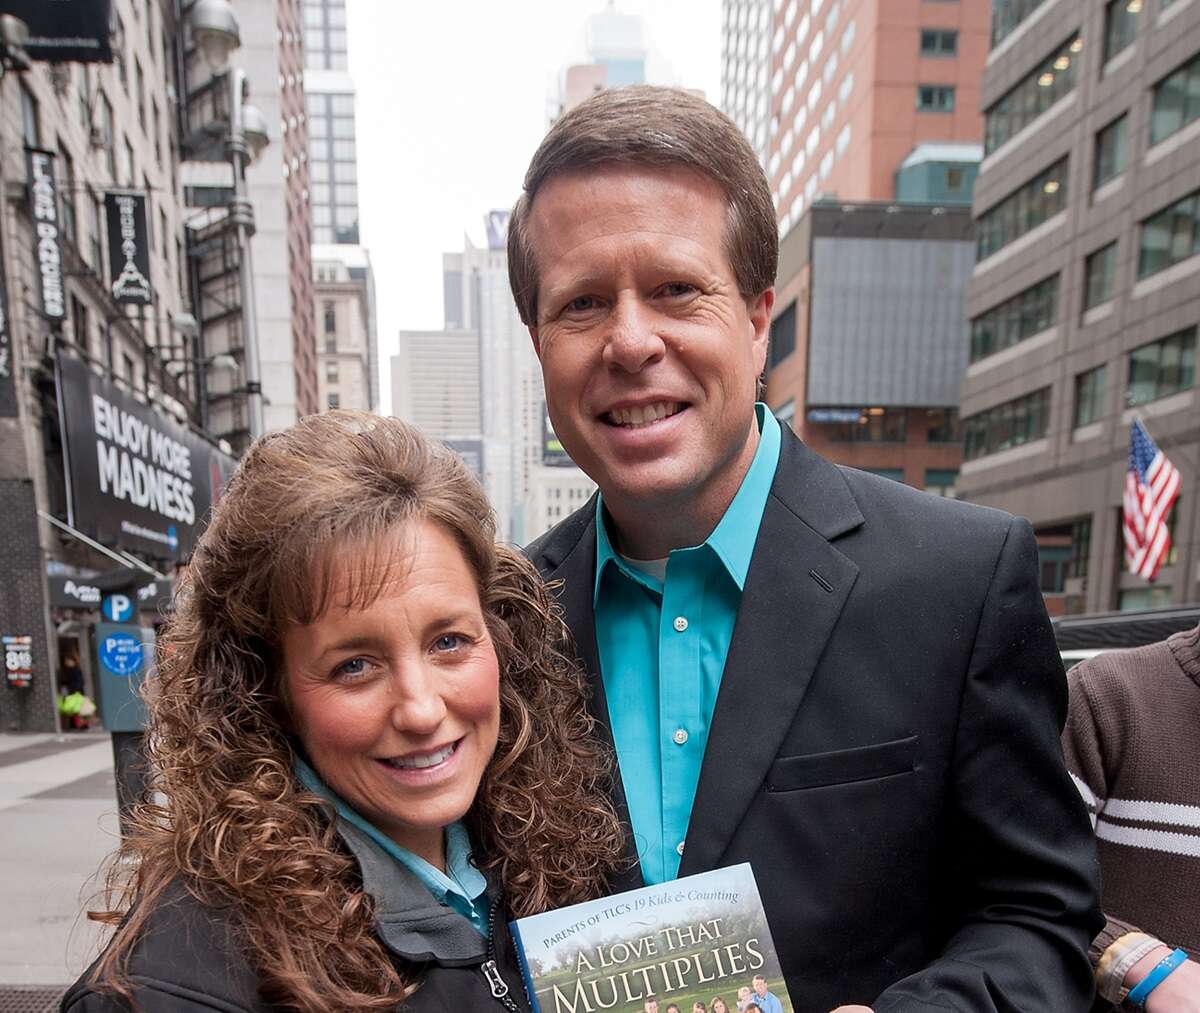 Jim Bob Duggar and Michelle Duggar visit "Extra" in Times Square on March 11, 2013